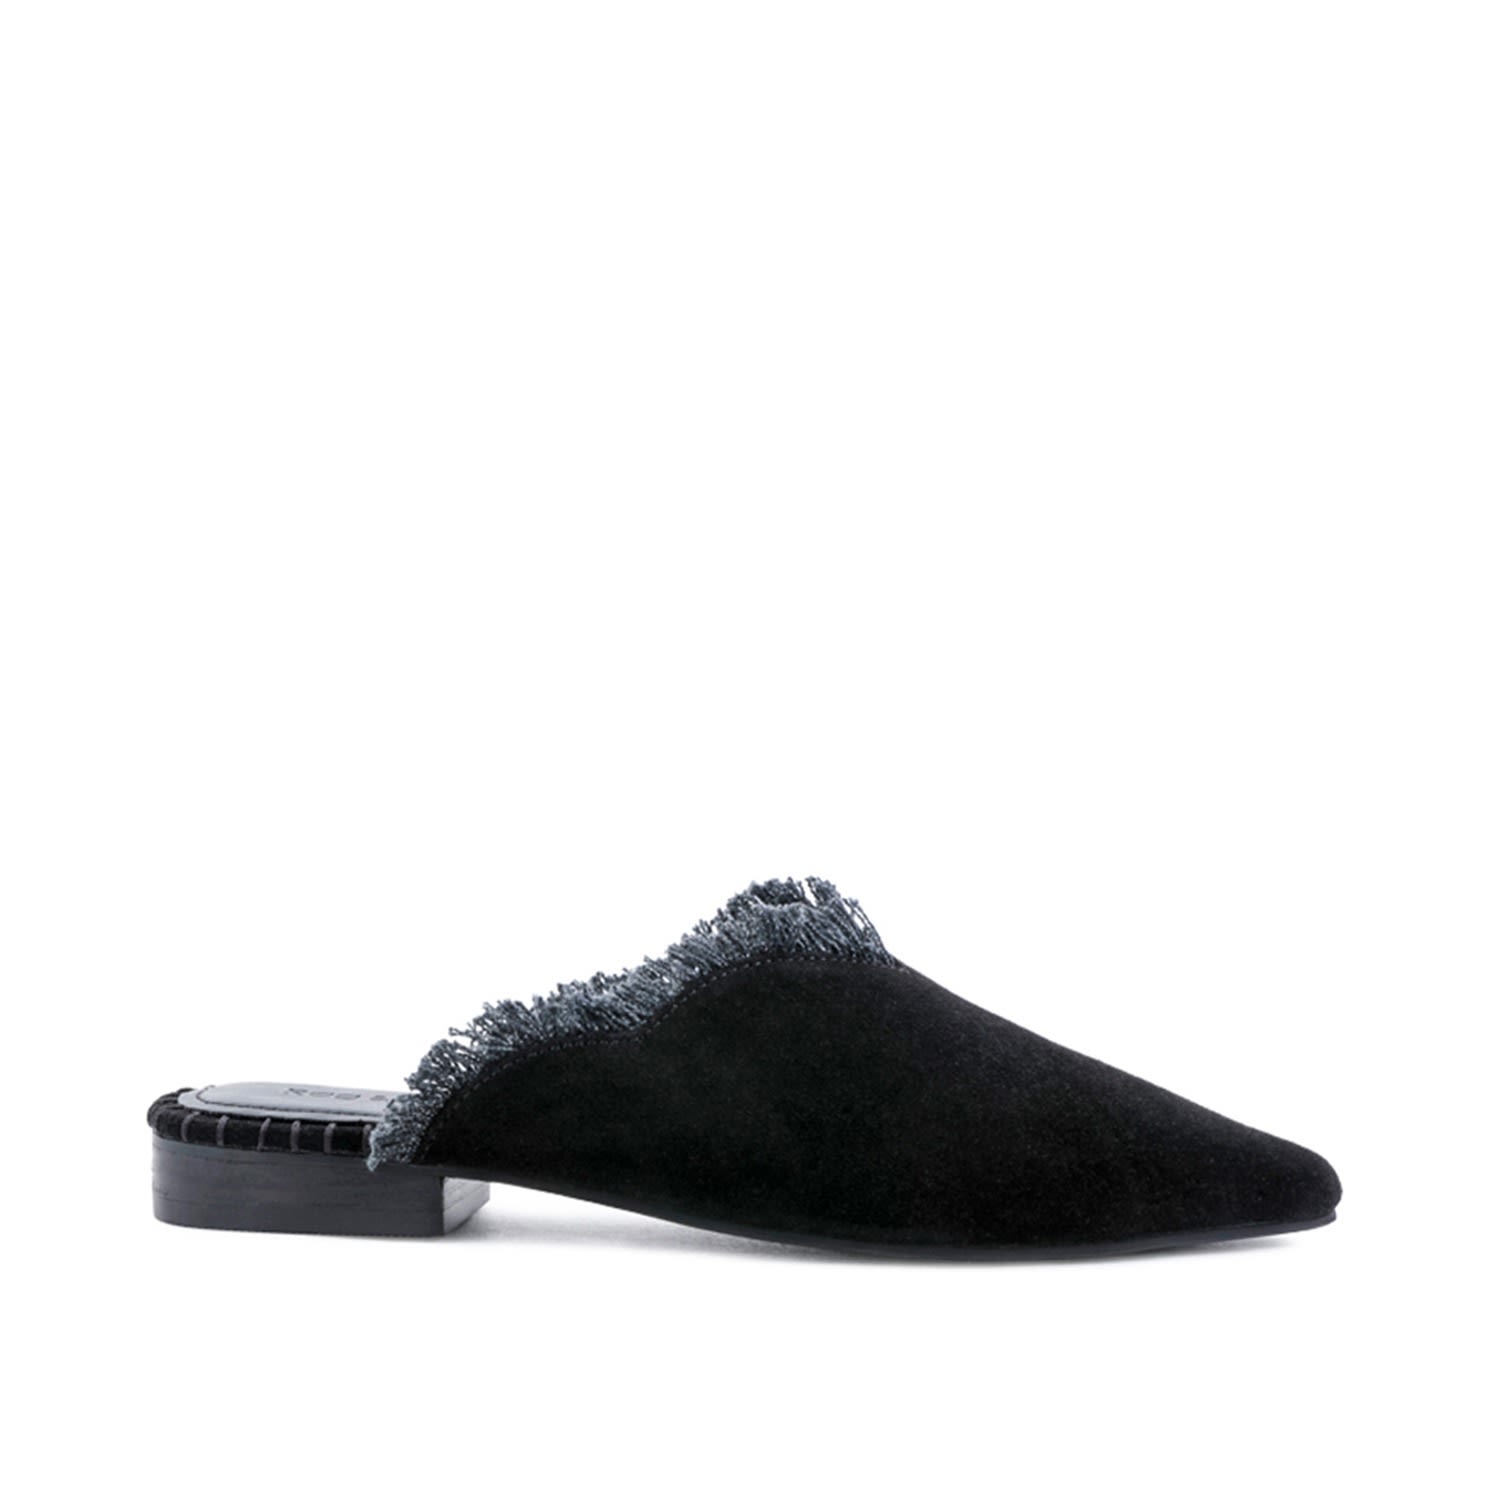 Rag & Co Women's Molly Black Frayed Leather Mules